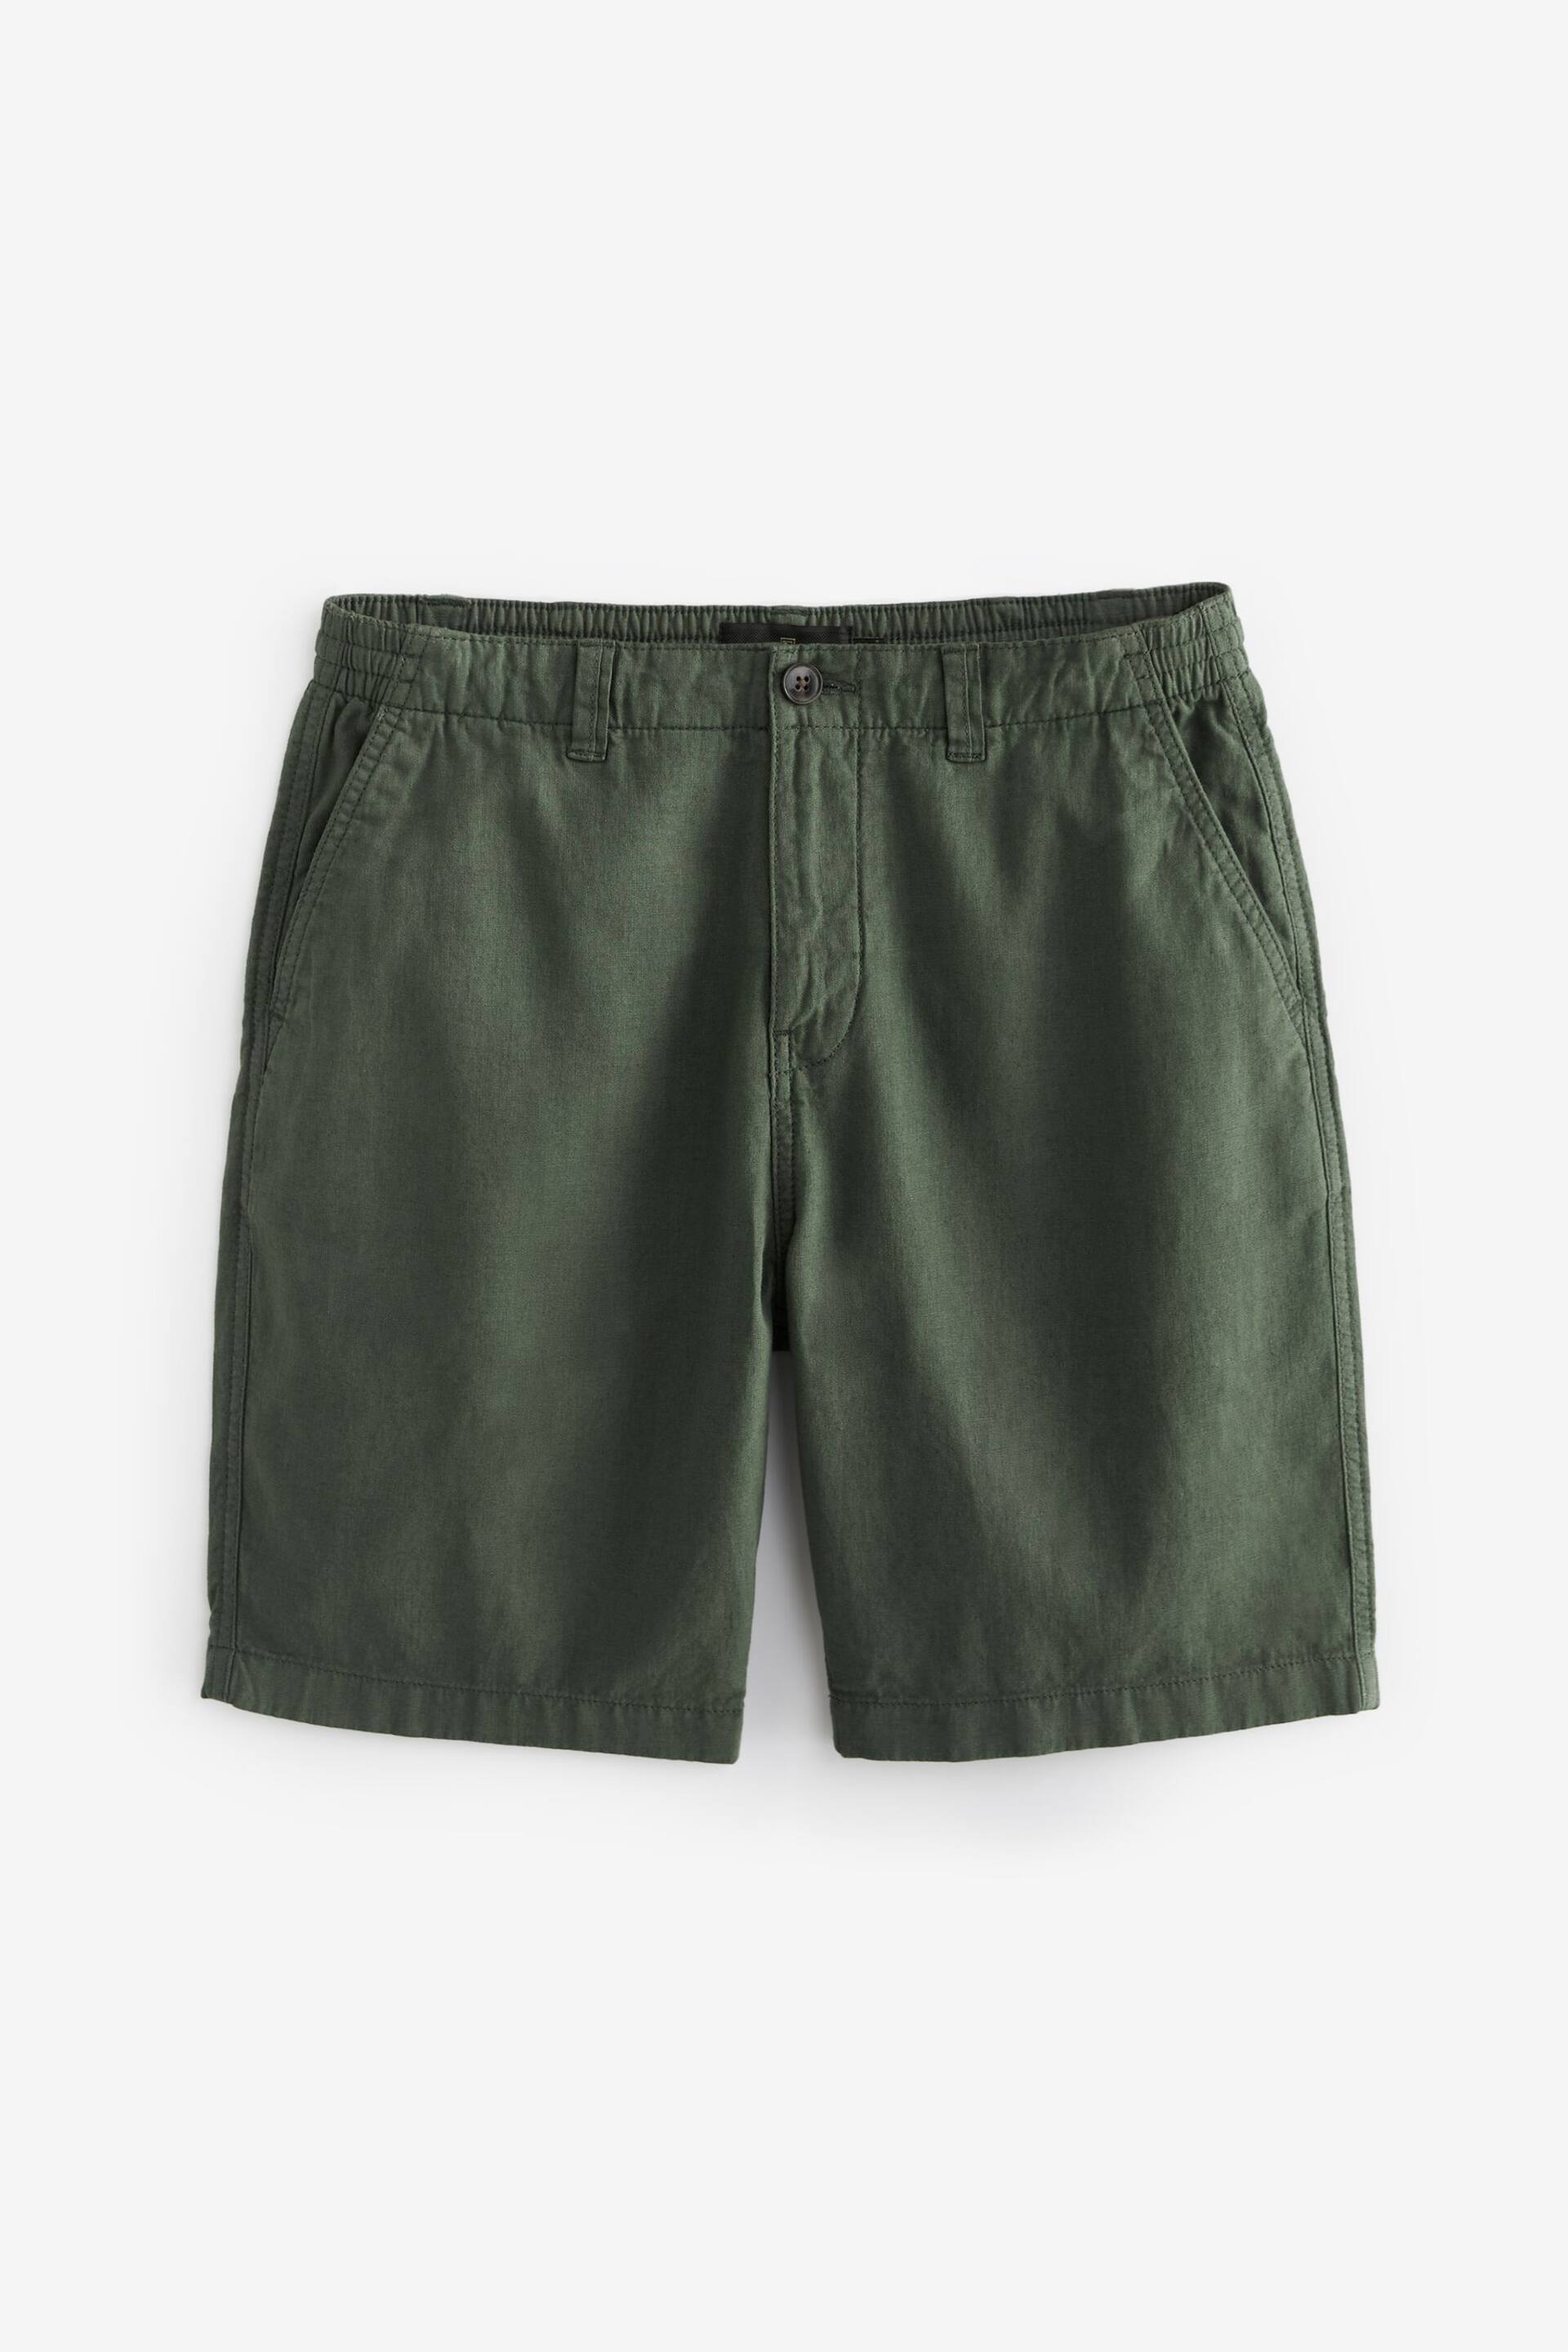 Green Linen Blend Chino Shorts - Image 5 of 5